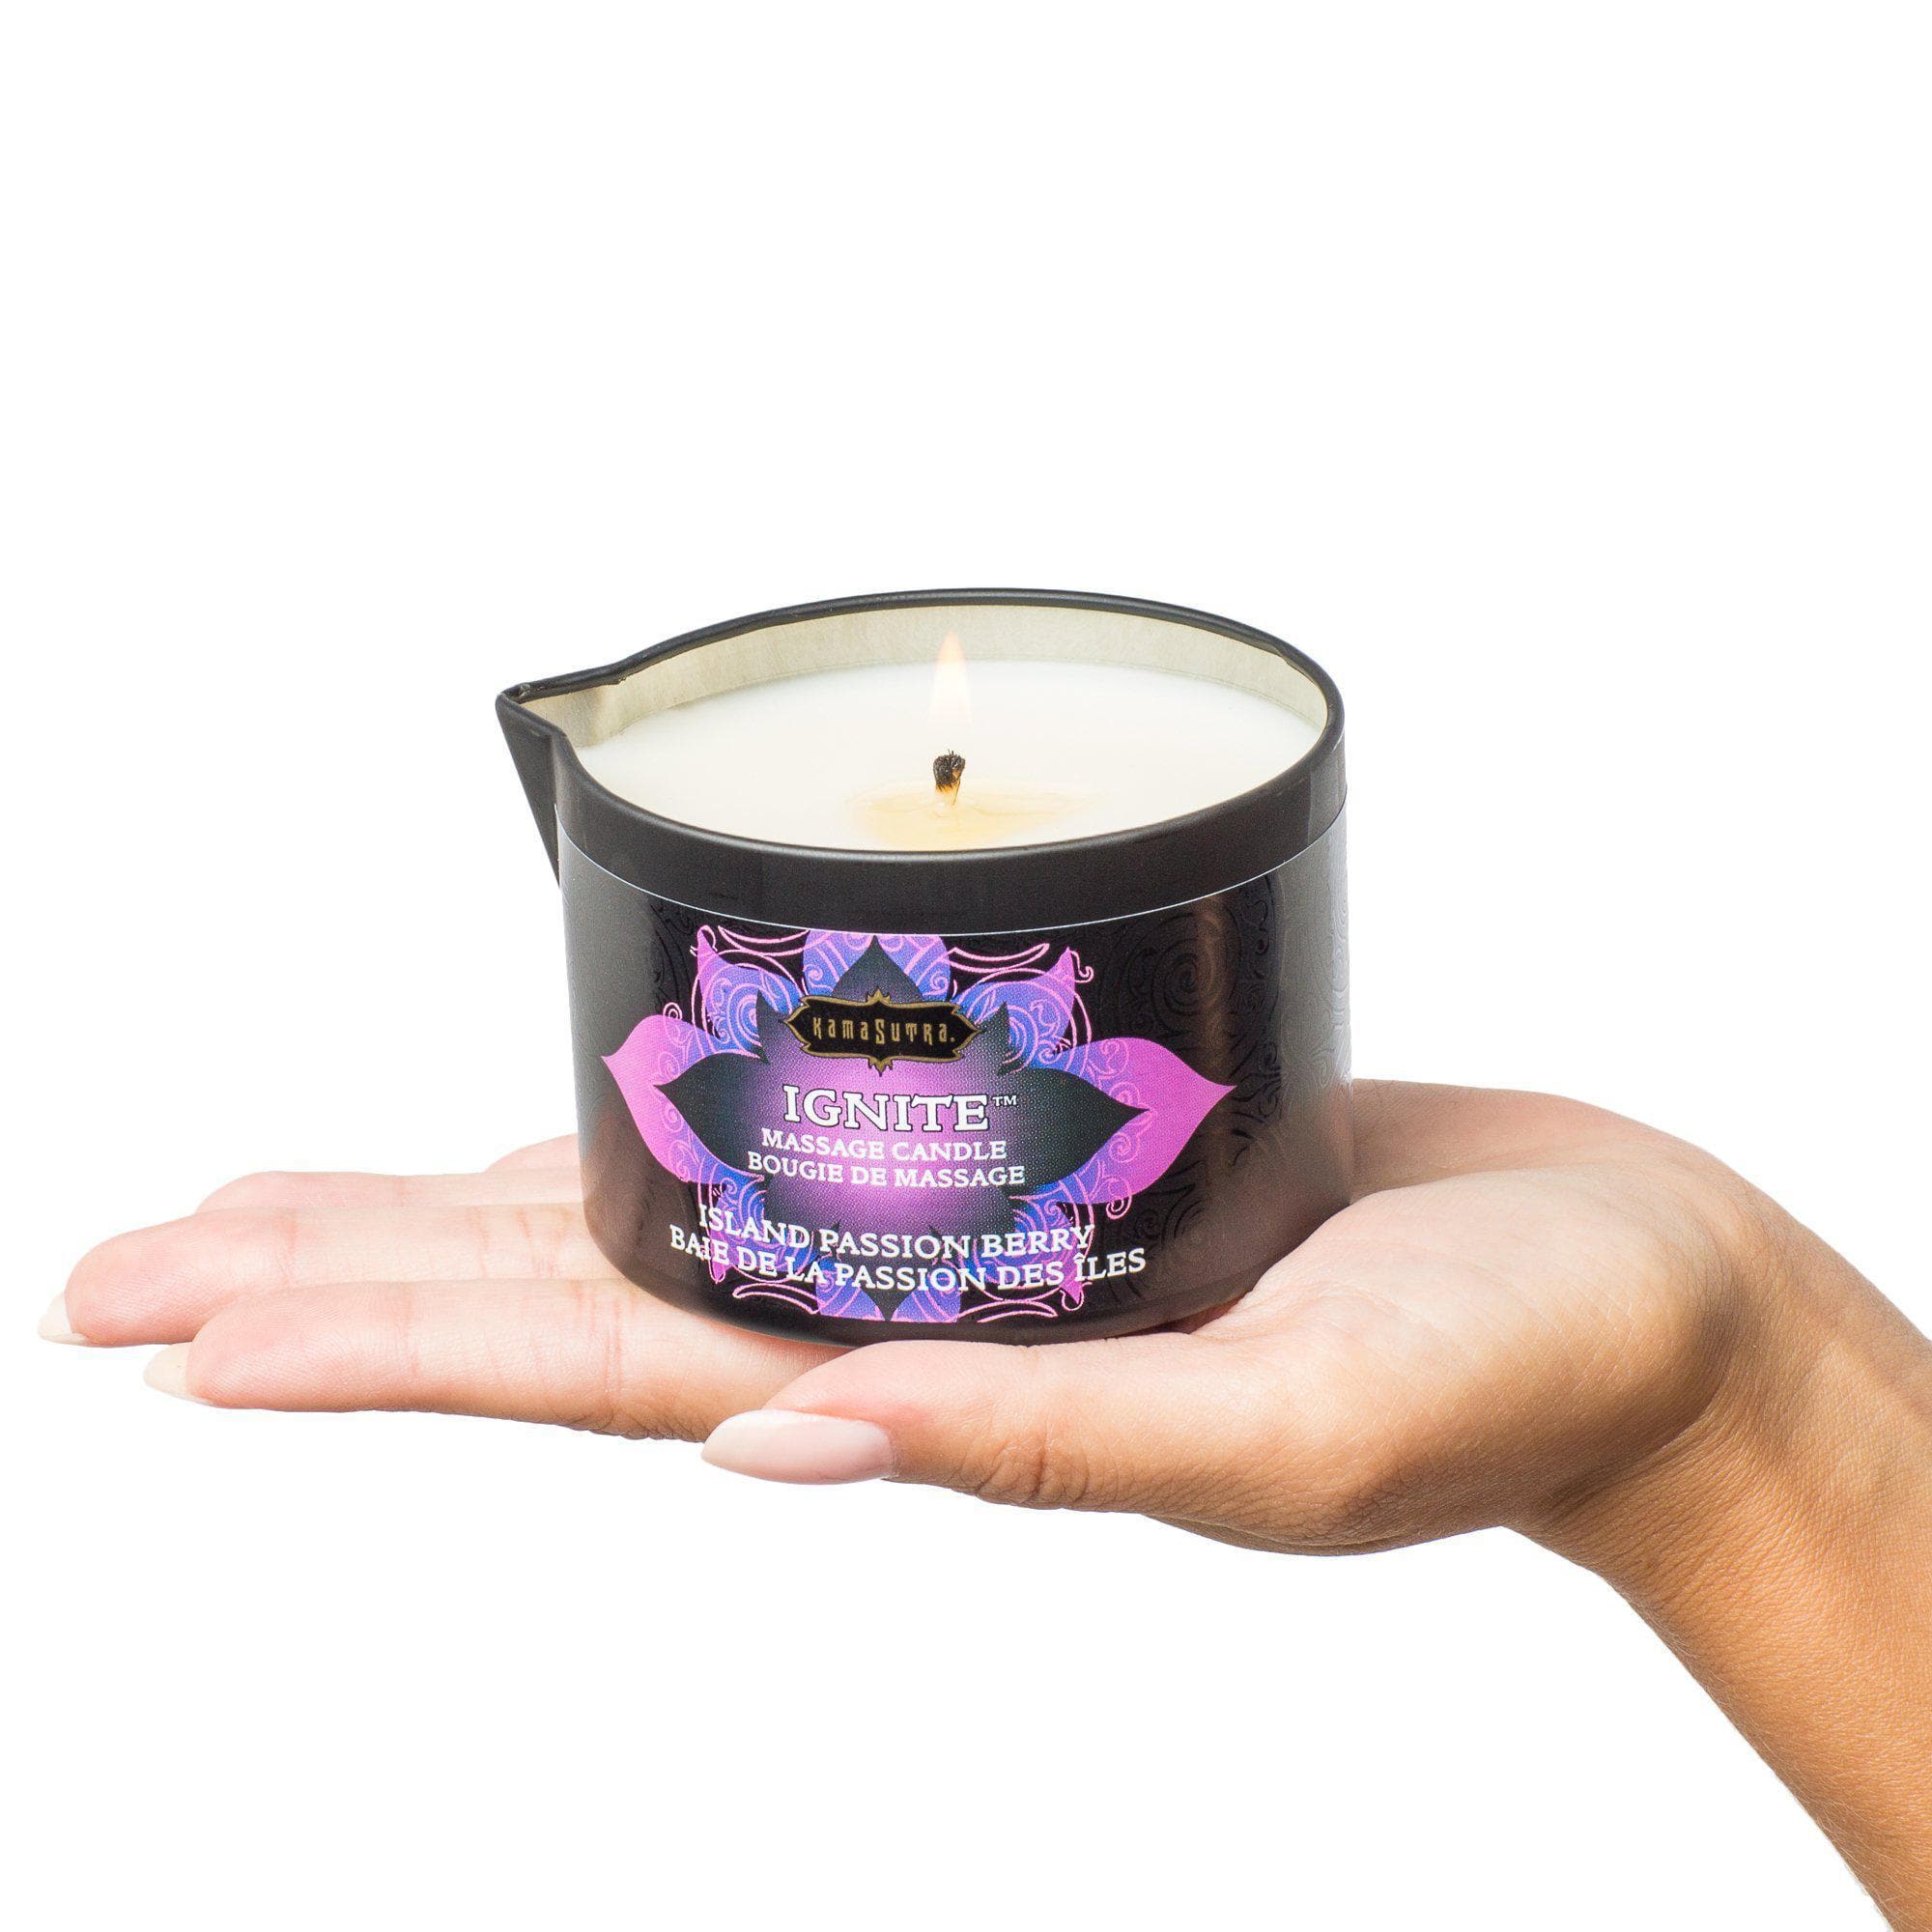 Ignite Massage Candle Warm Massage Oil Scented 6 oz Exotic Wax Free Candle - Romantic Blessings